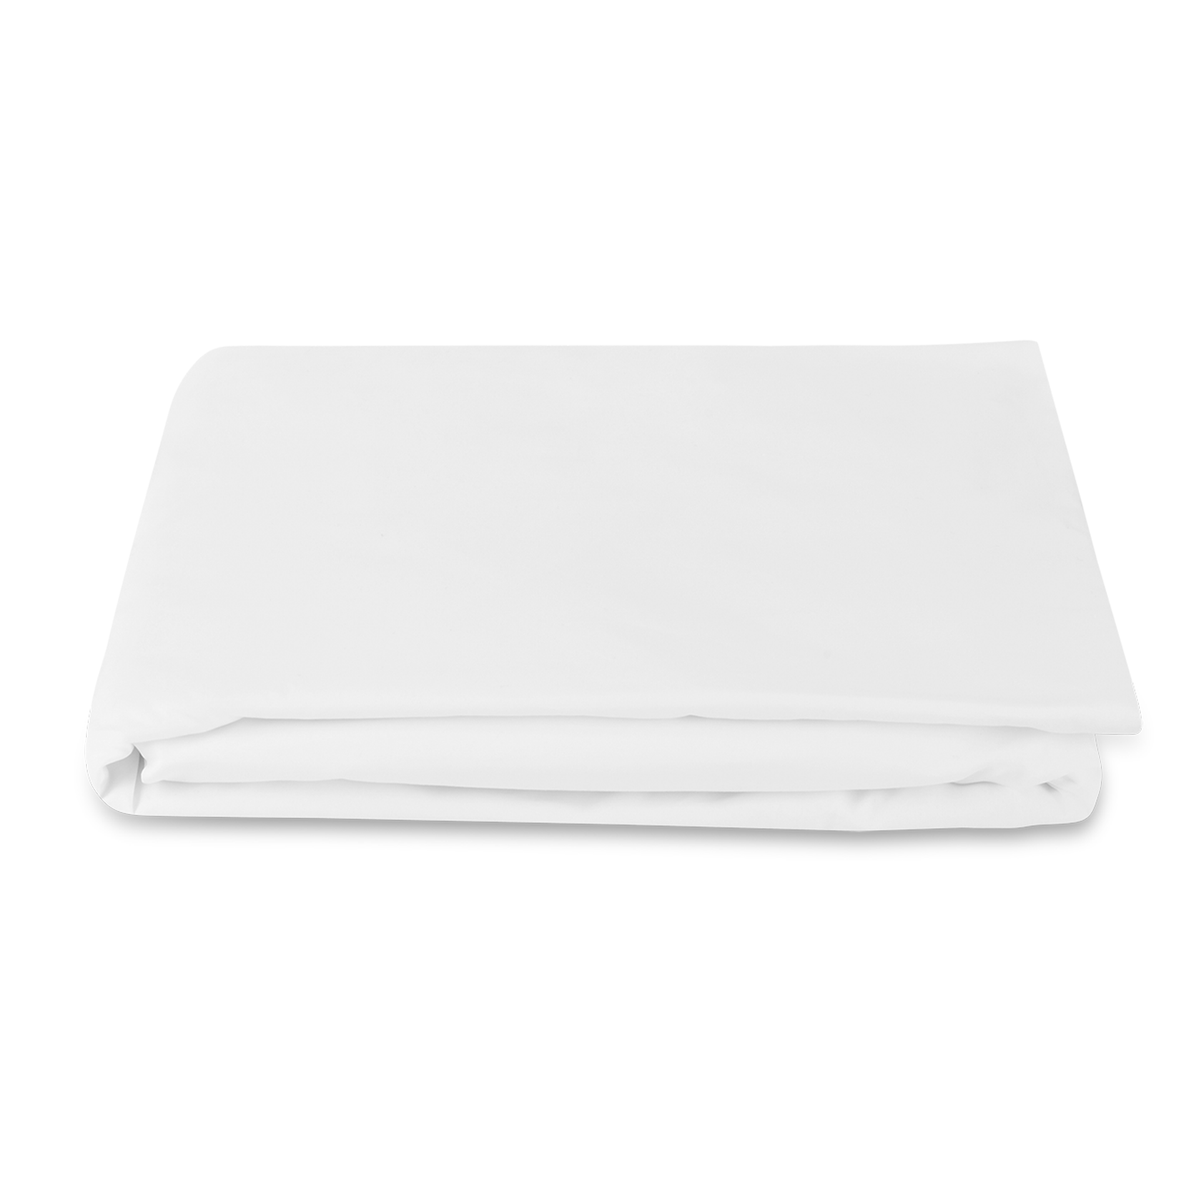 Fitted Sheet of Matouk Bergamo Bedding in White Color